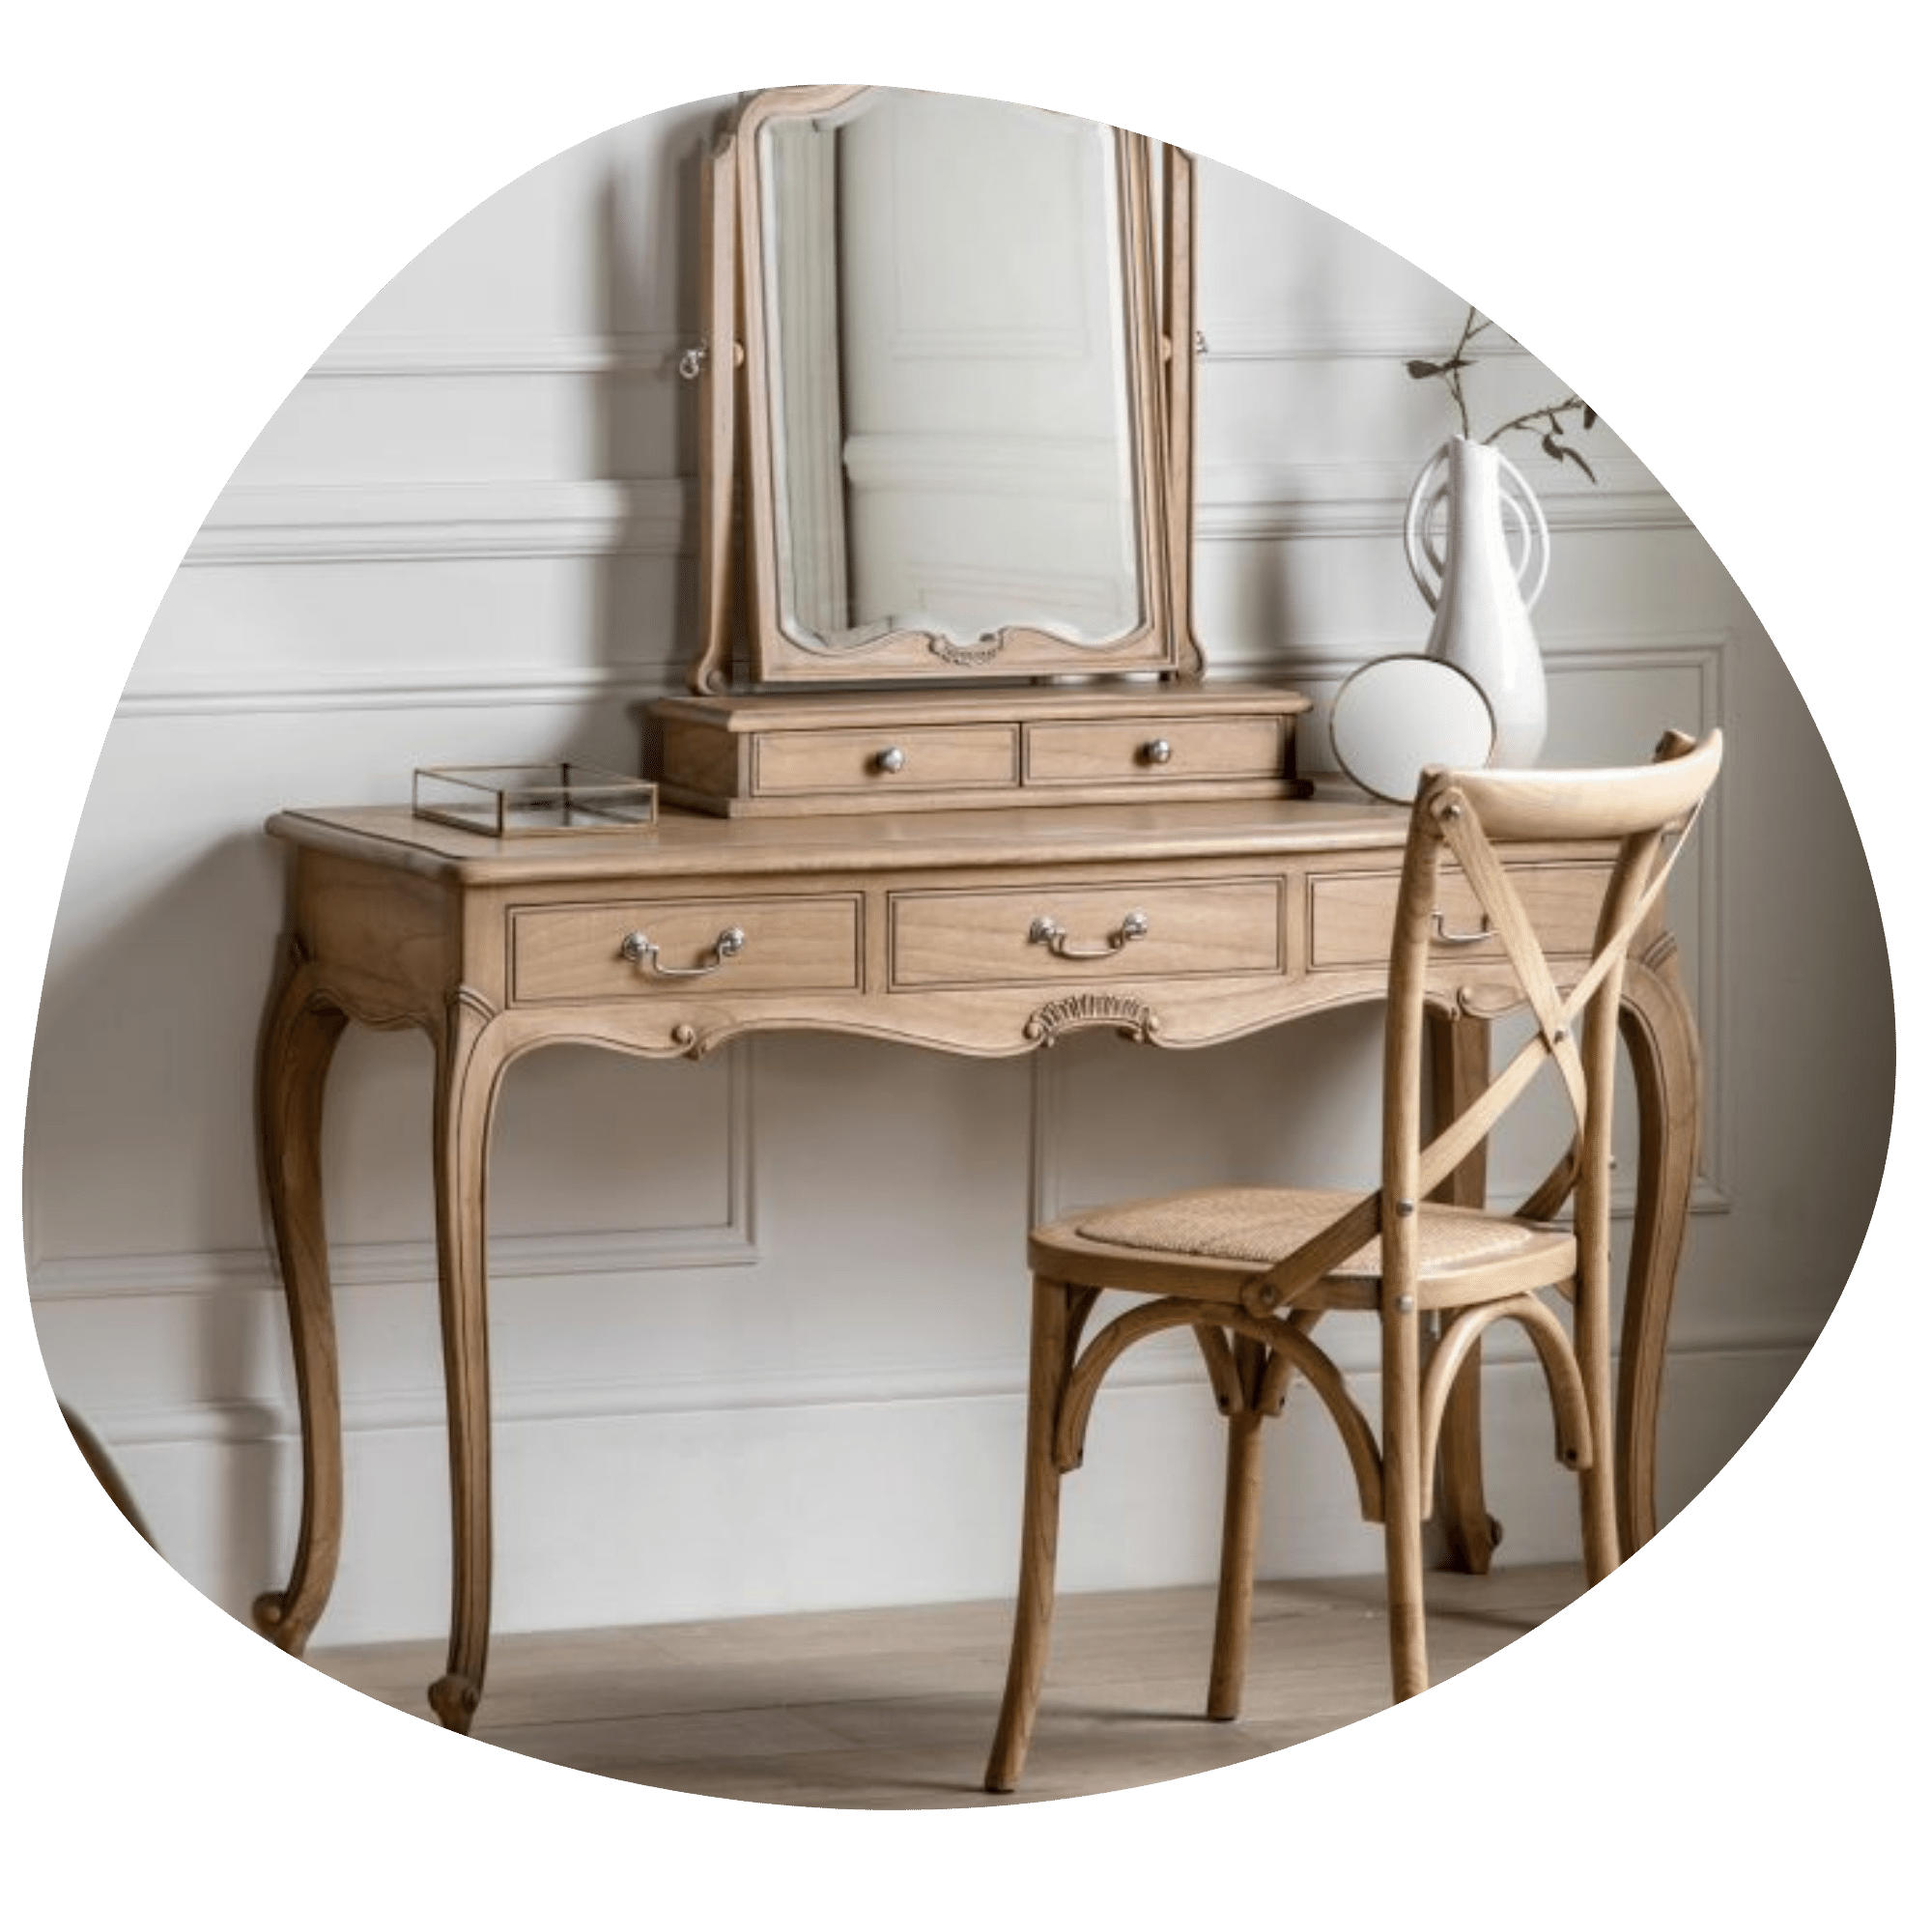 MARIE mindy wood french style dressing table in weathered finish | malletandplane.com